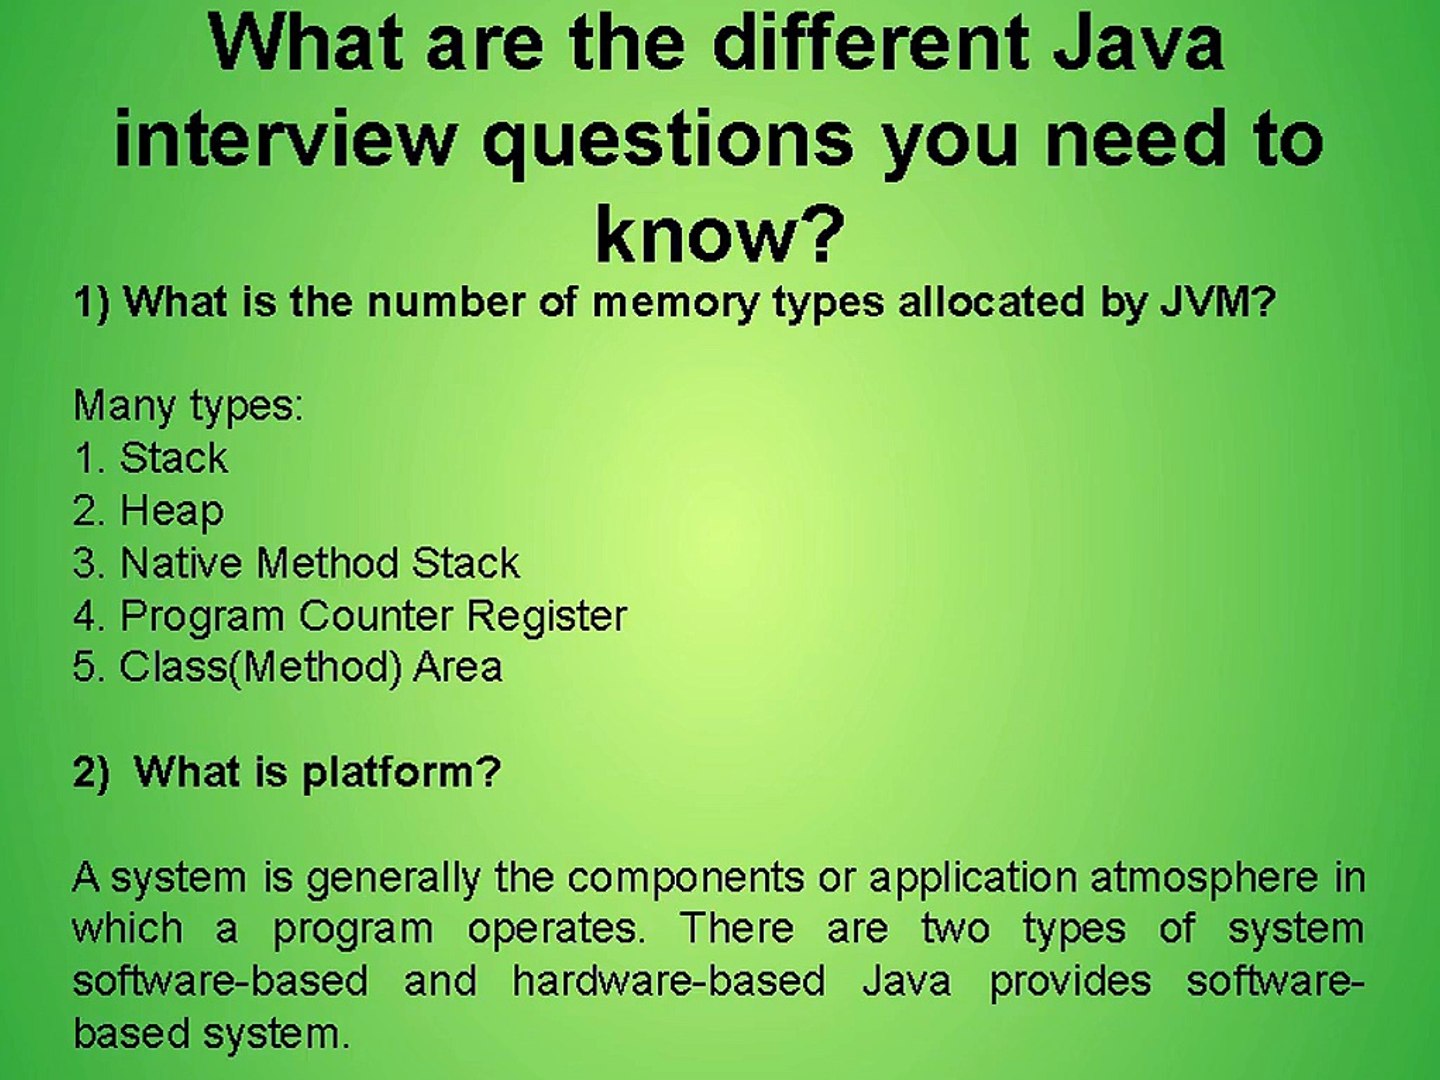 3 Simple Tips For Using Java interview questions To Get Ahead Your Competition